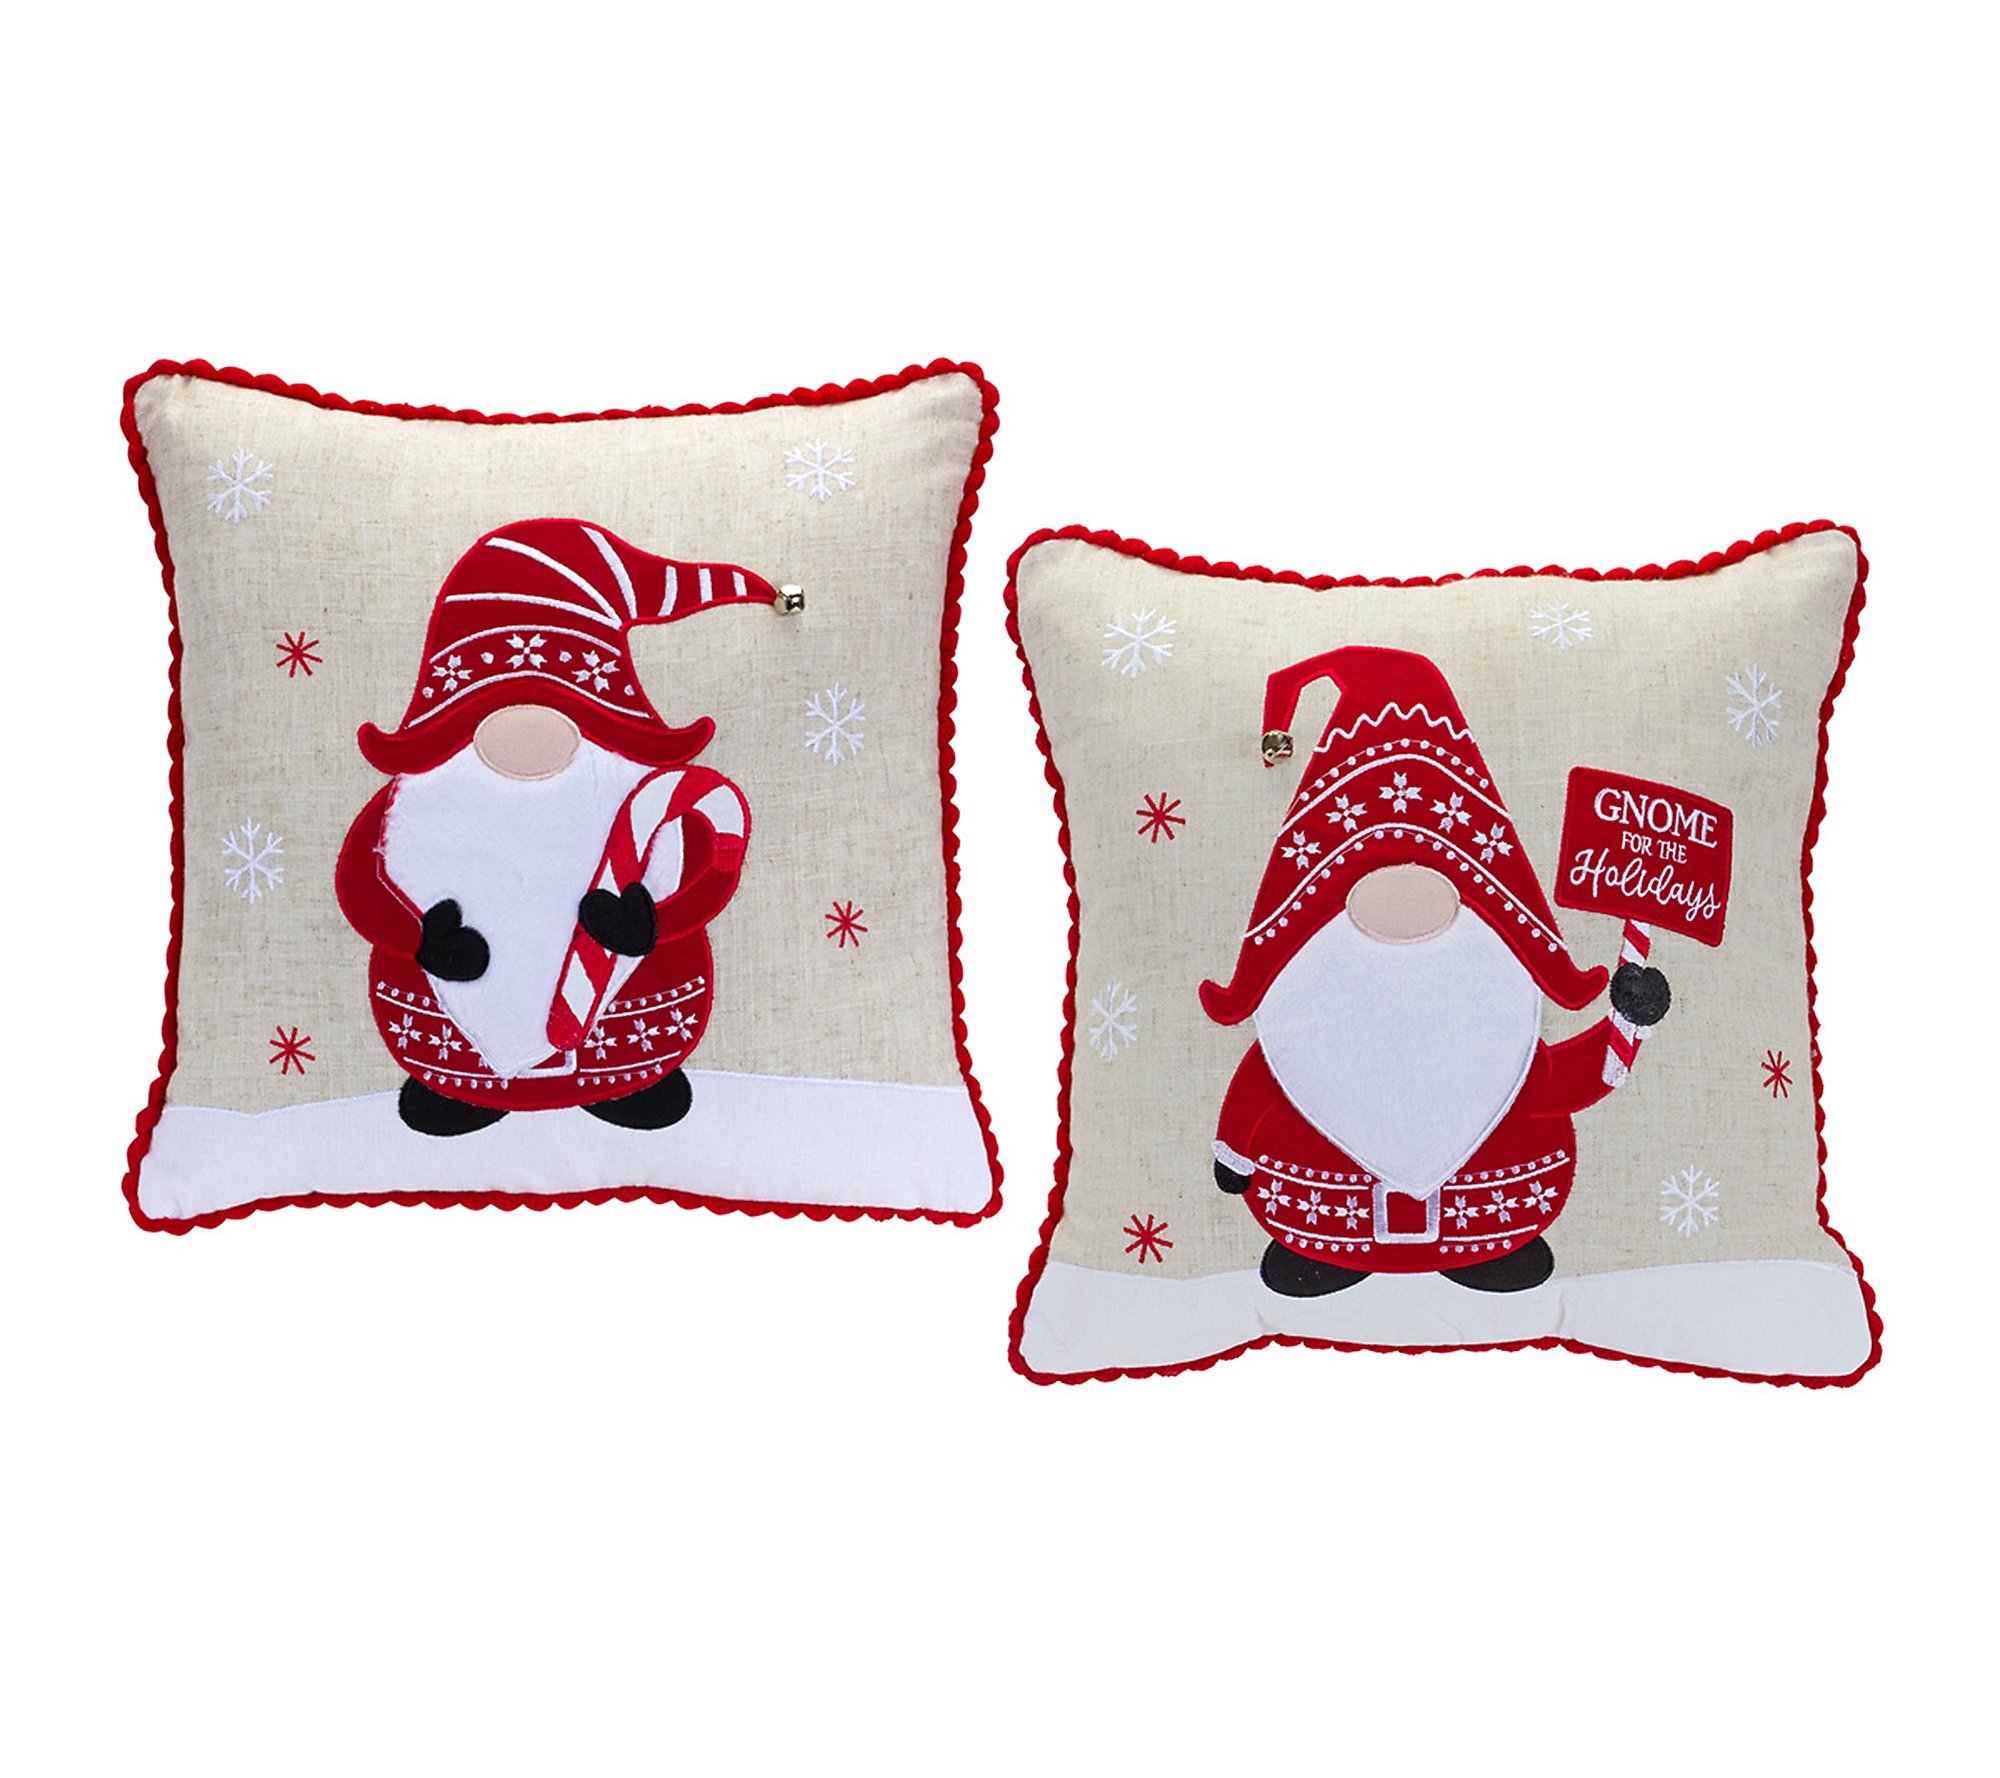 Melrose Gnome Holiday Pillow (Set of 2)